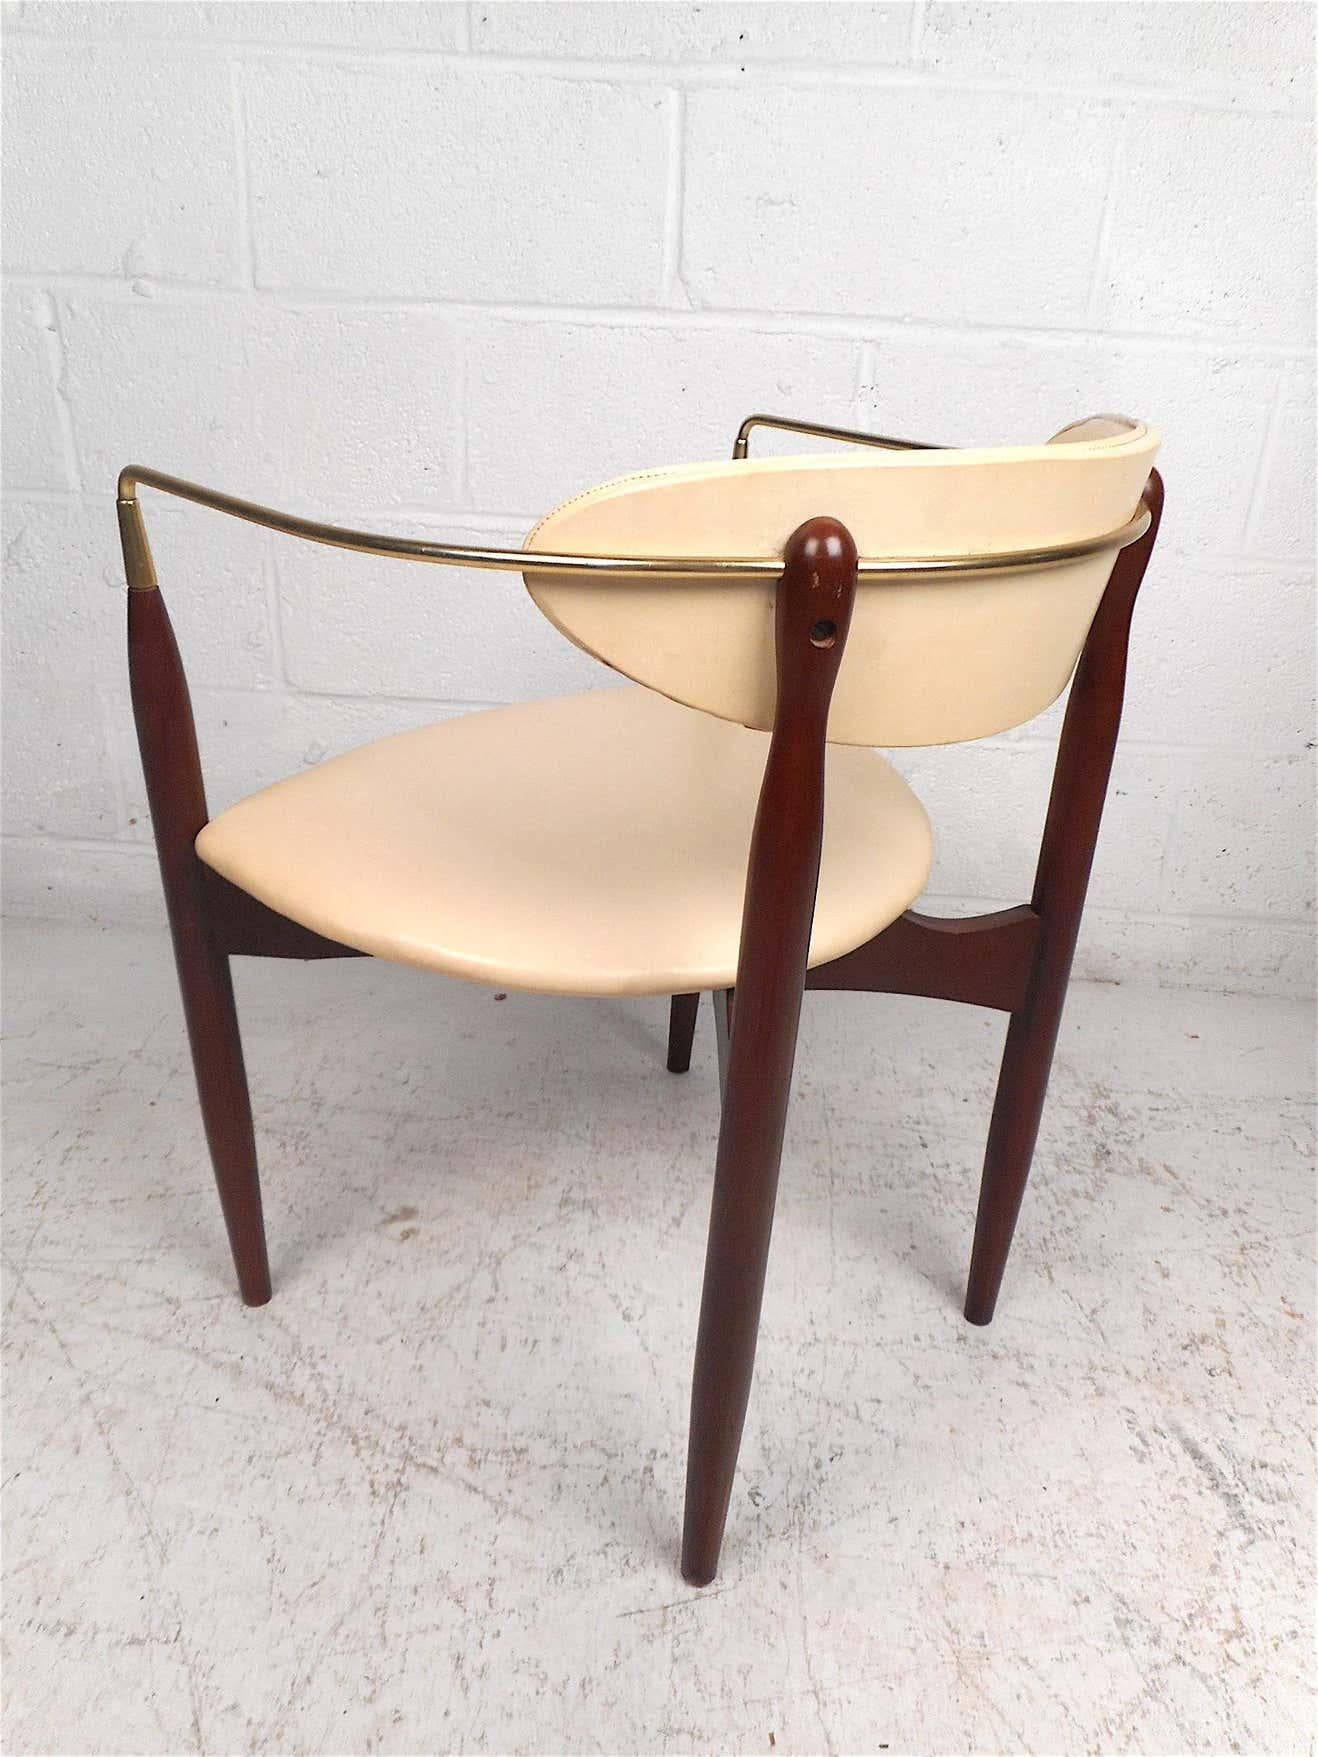 American Mid-Century Modern Chair by Kedawood Furniture